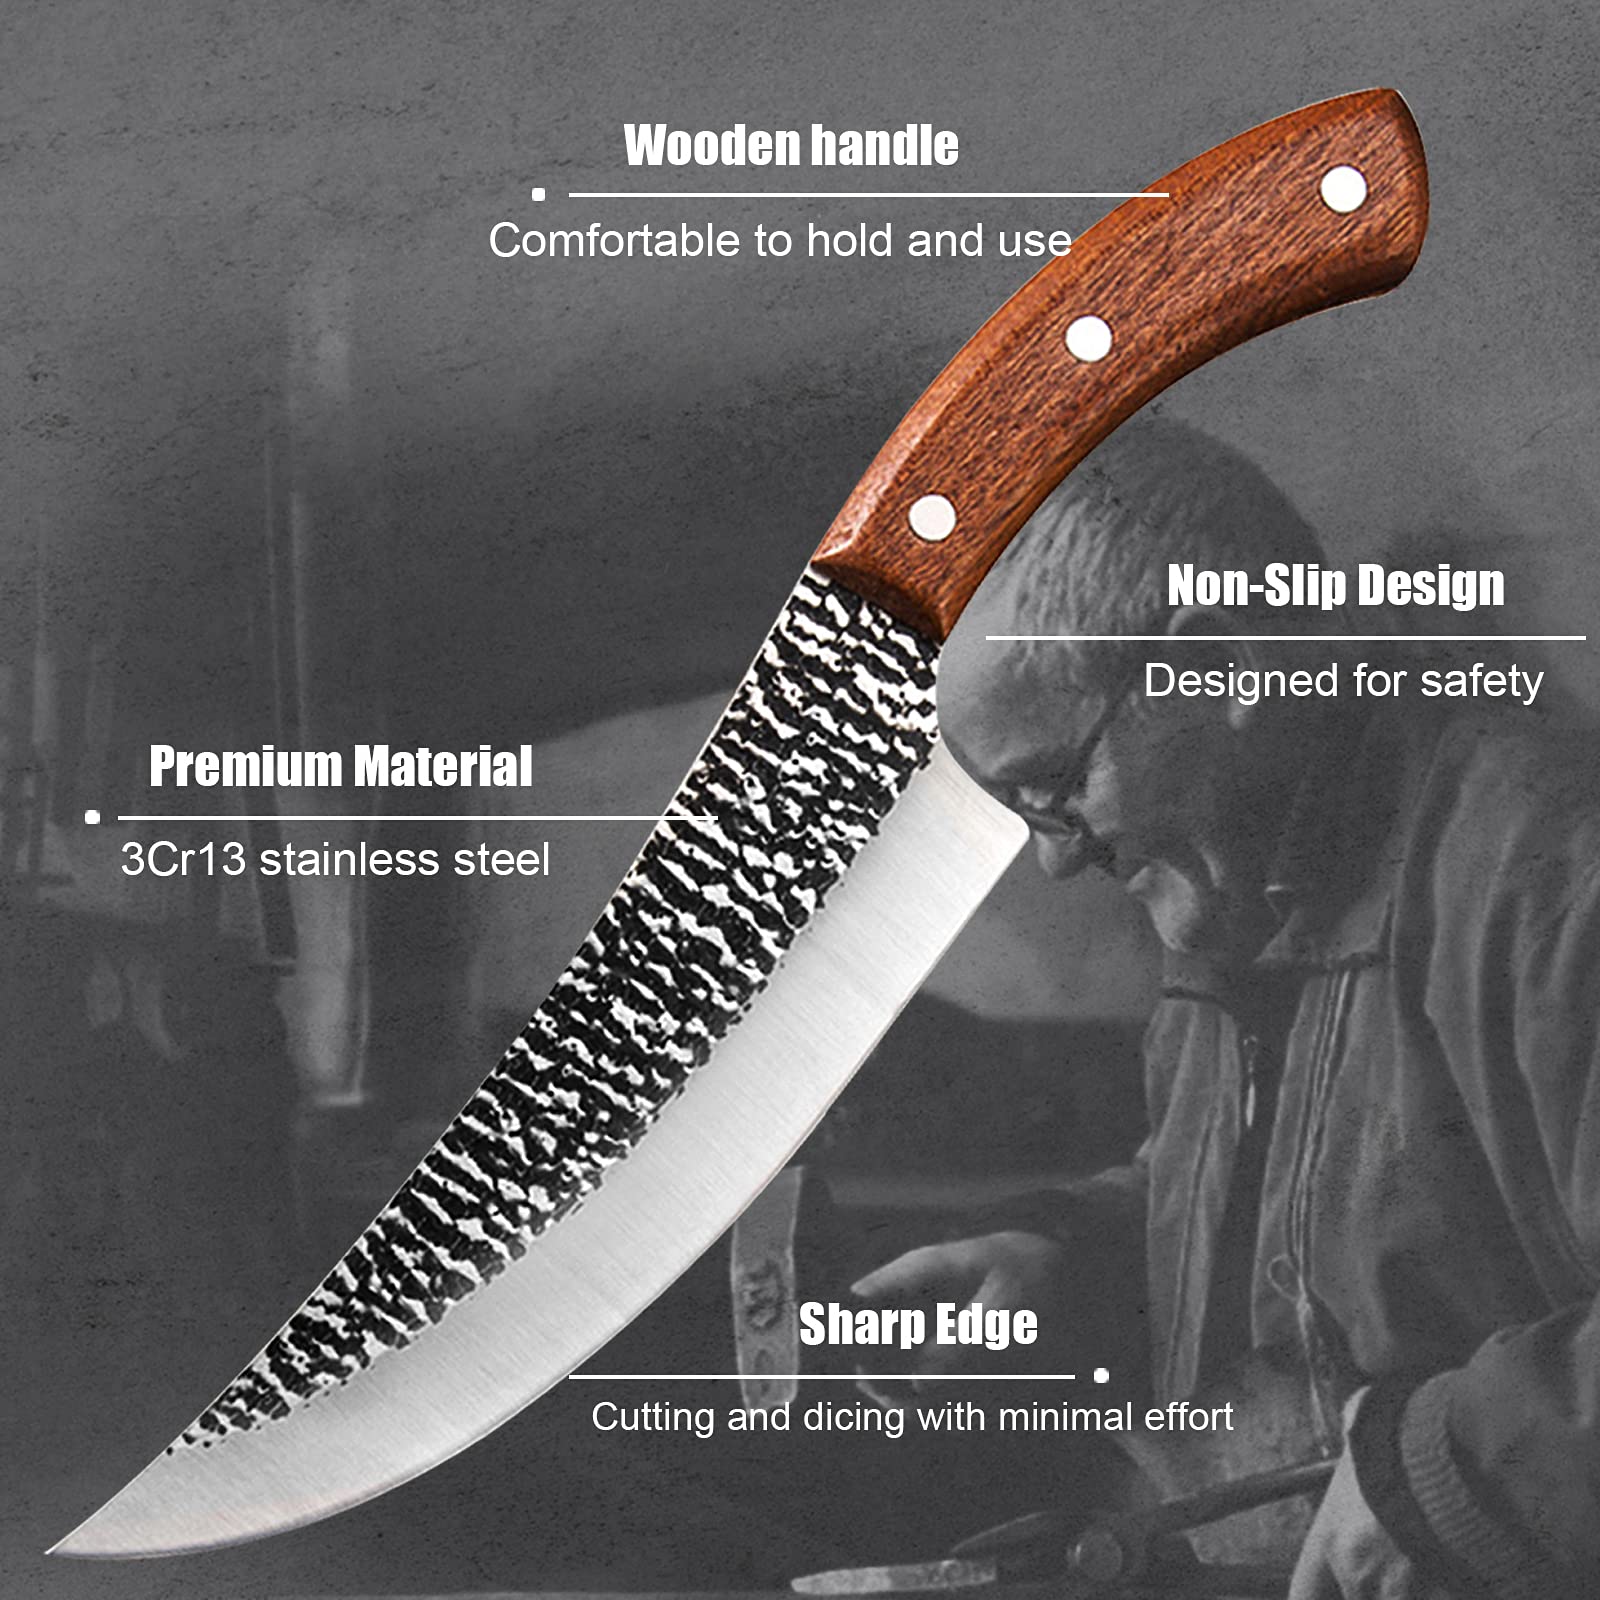 WXCOO 7-Inch Chef Knife Hand Forged Cleaver Knife High Carbon Stainless Steel, Boning knives Chef Butcher Knife with Sheath & Pocket Sharpener for Kitchen, Camping, Home, Outdoor, BBQ